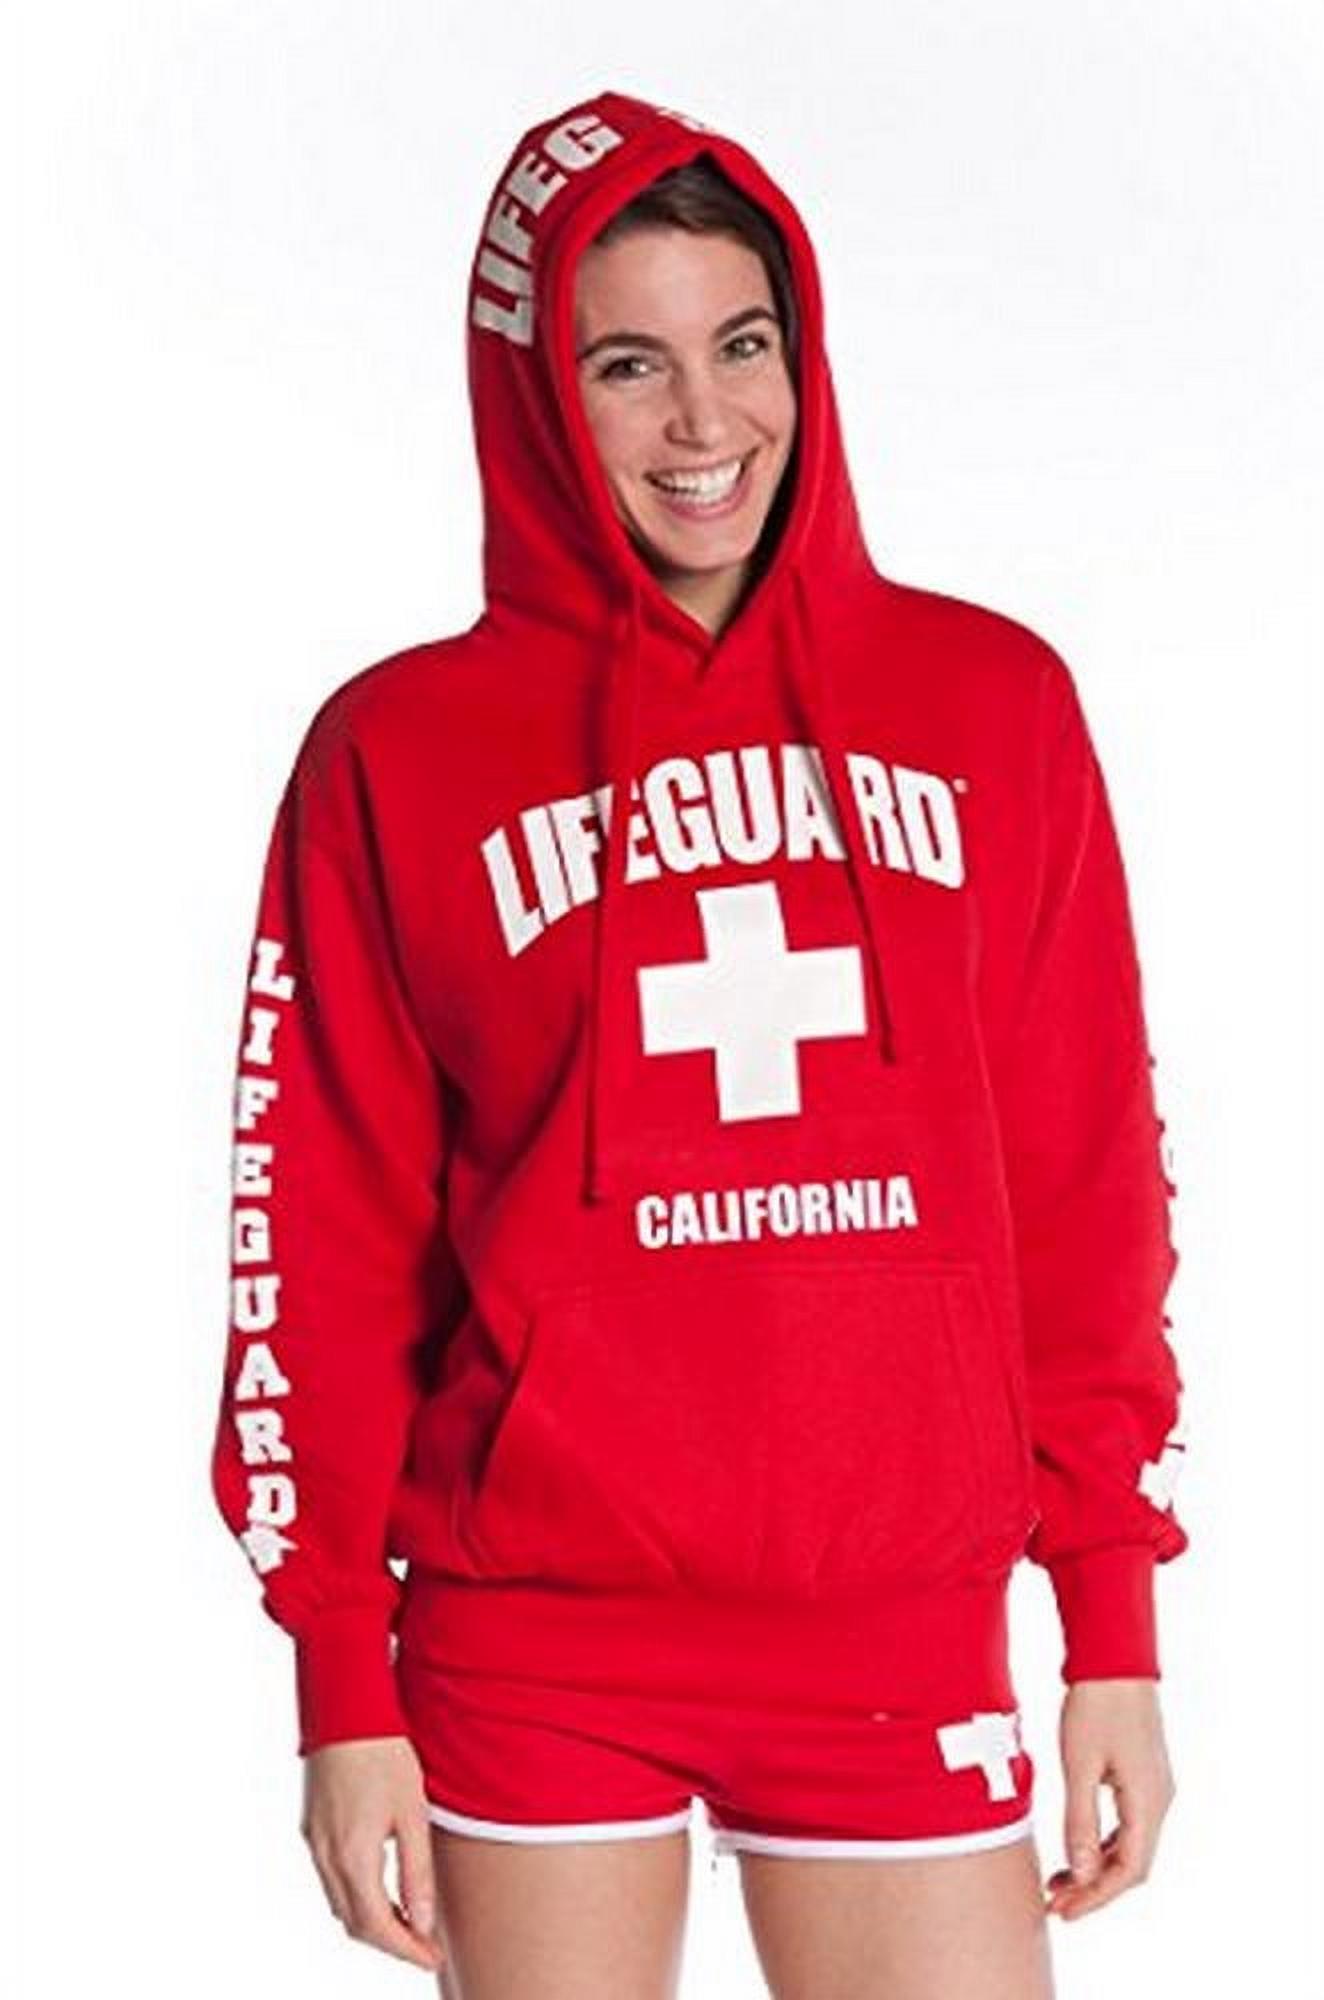 LIFEGUARD Officially Licensed Ladies California Hoodie Sweatshirt Apparel for Women, Teens and Girls Red - image 2 of 2